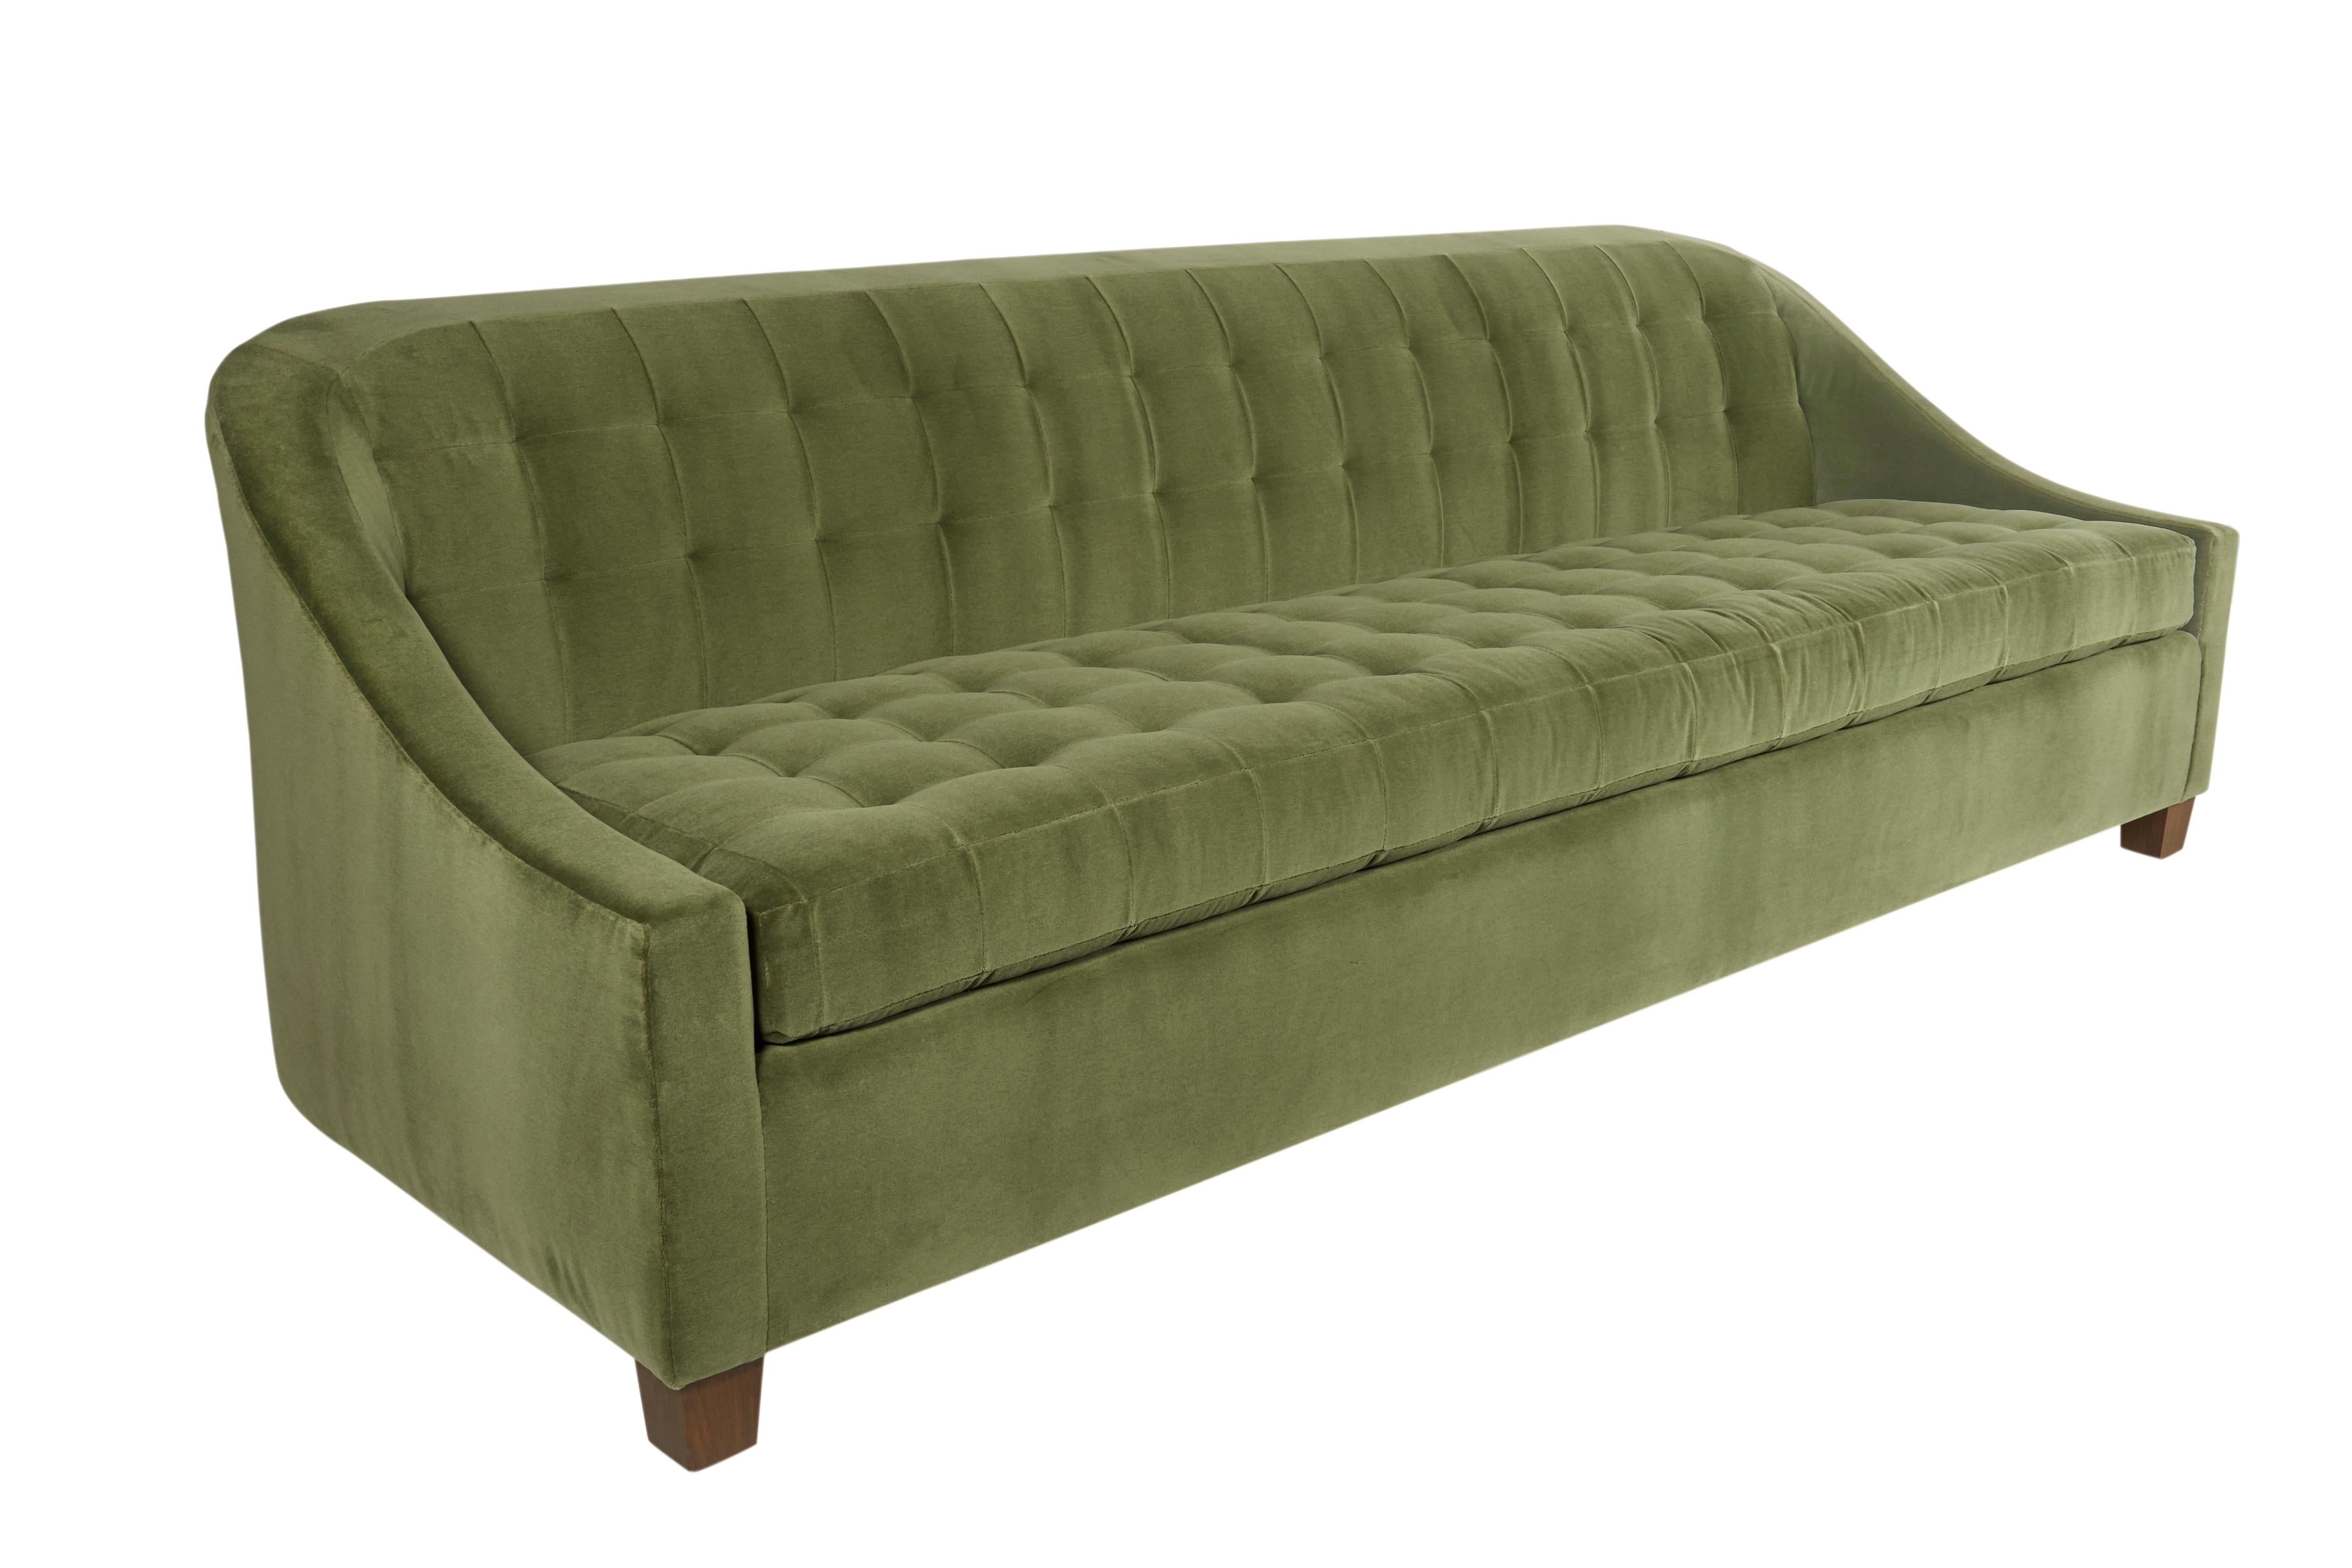 Sloped, low arm sofa featuring blind, recessed tufting on both back and bench seat cushion. The Renwick Sofa frame is constructed using solid maple wood with 50 / 50 down feather filled cushions. Four finishes available for sofa legs. Available in